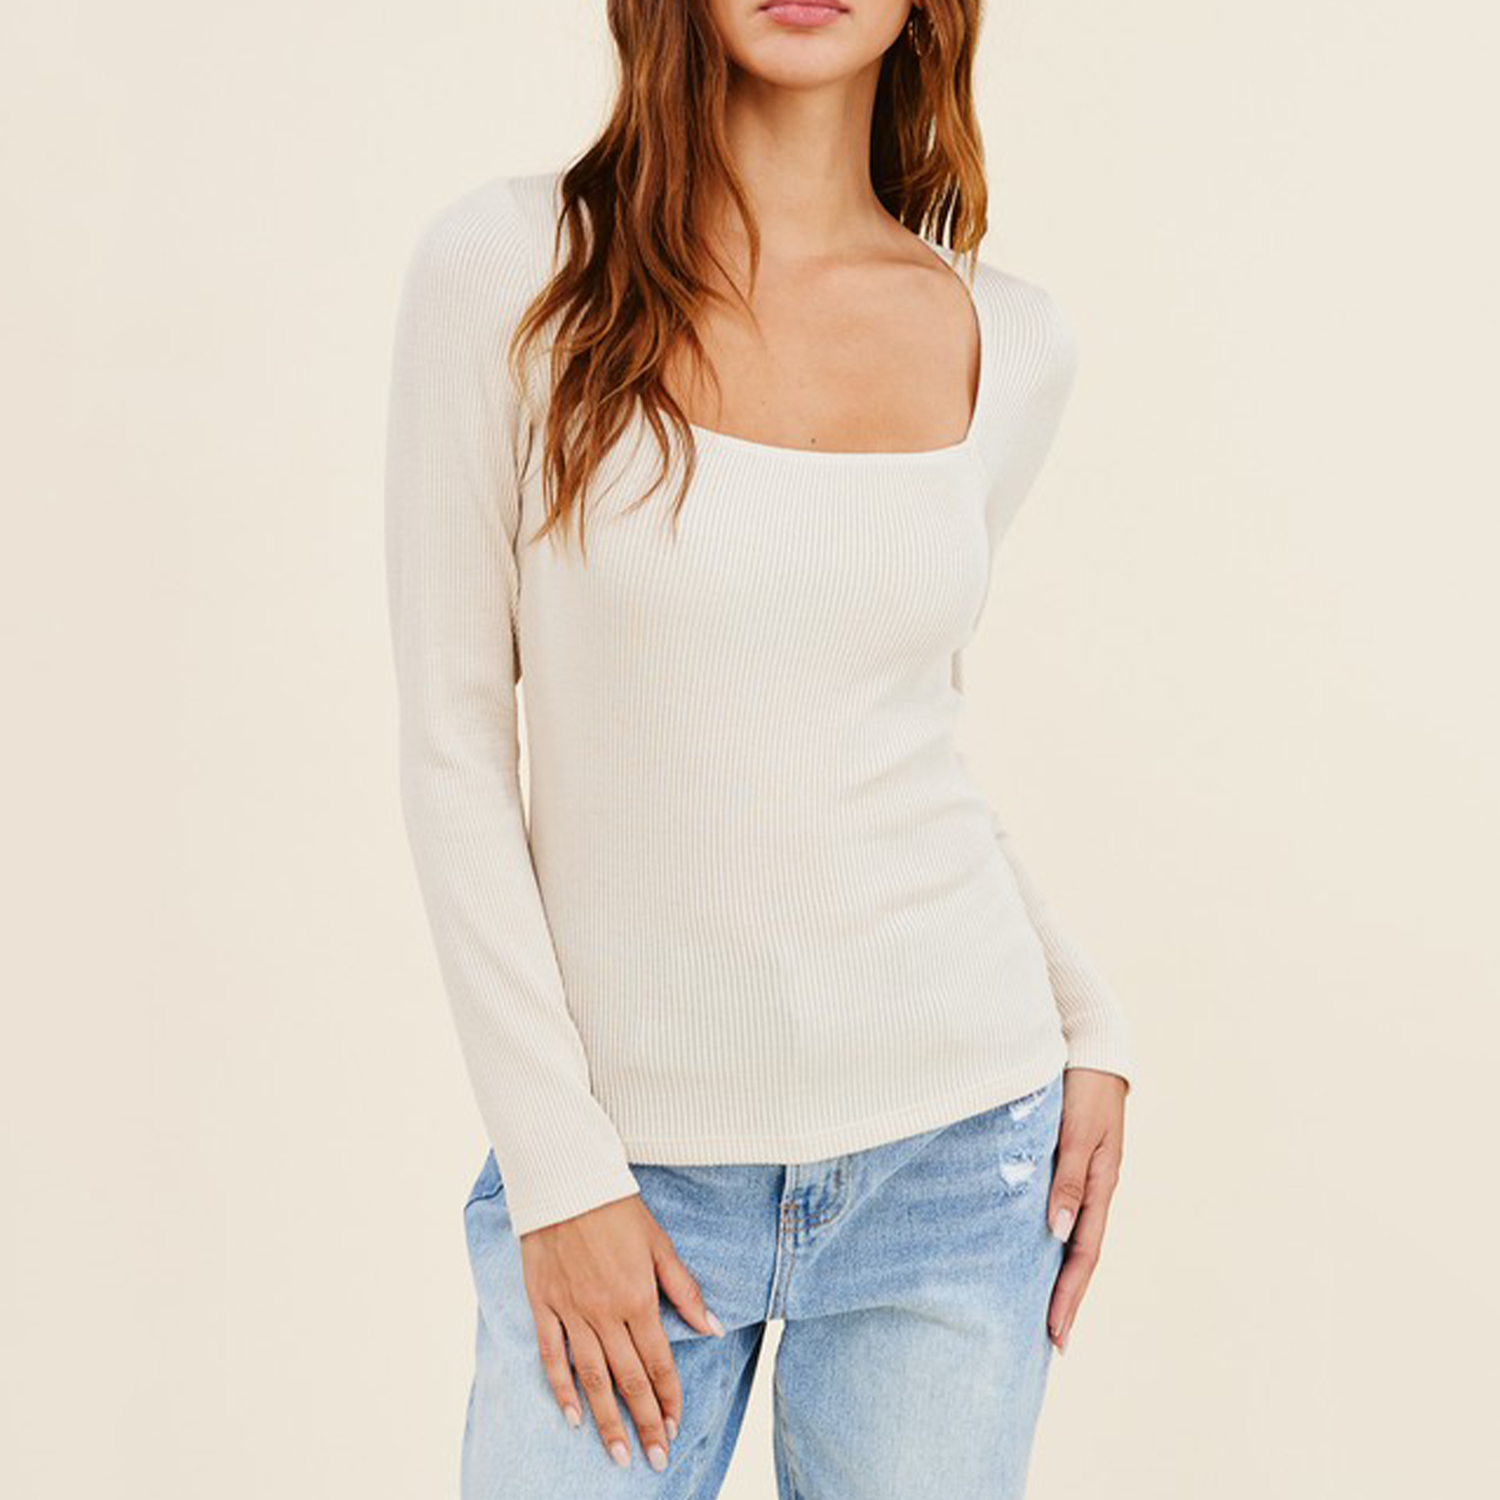 Square Neck Long Sleeve Rib Top. Ribbed knit creates a body conscious long sleeve tee that adds 90s style to your look with its square neckline